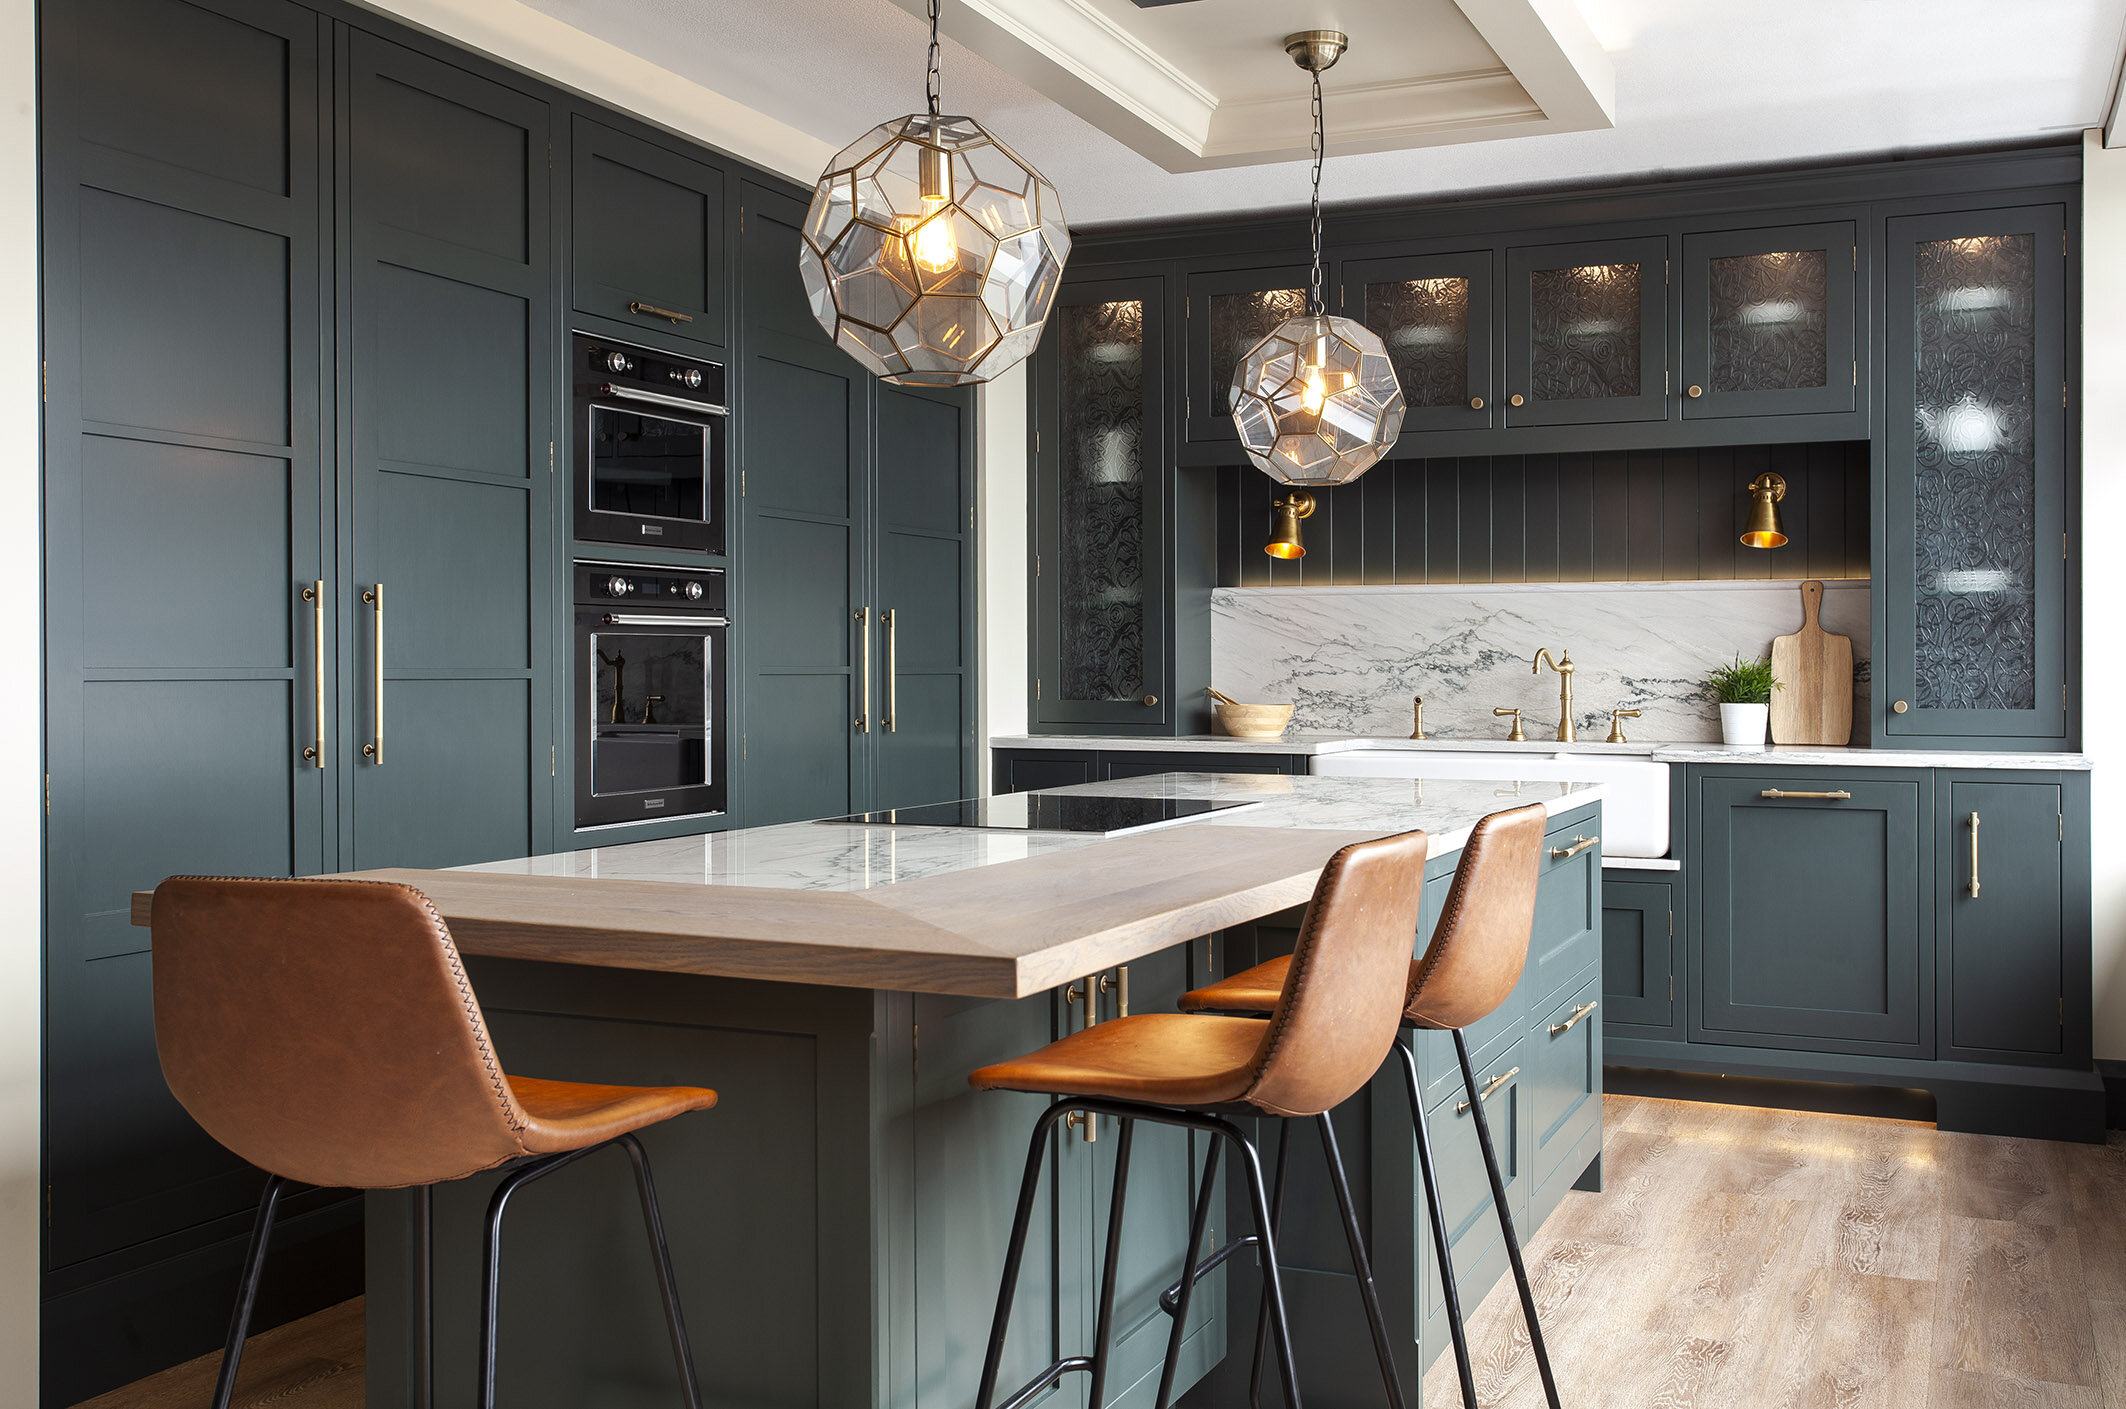 Wrights Design House is one of the UK and Ireland’s premium kitchen